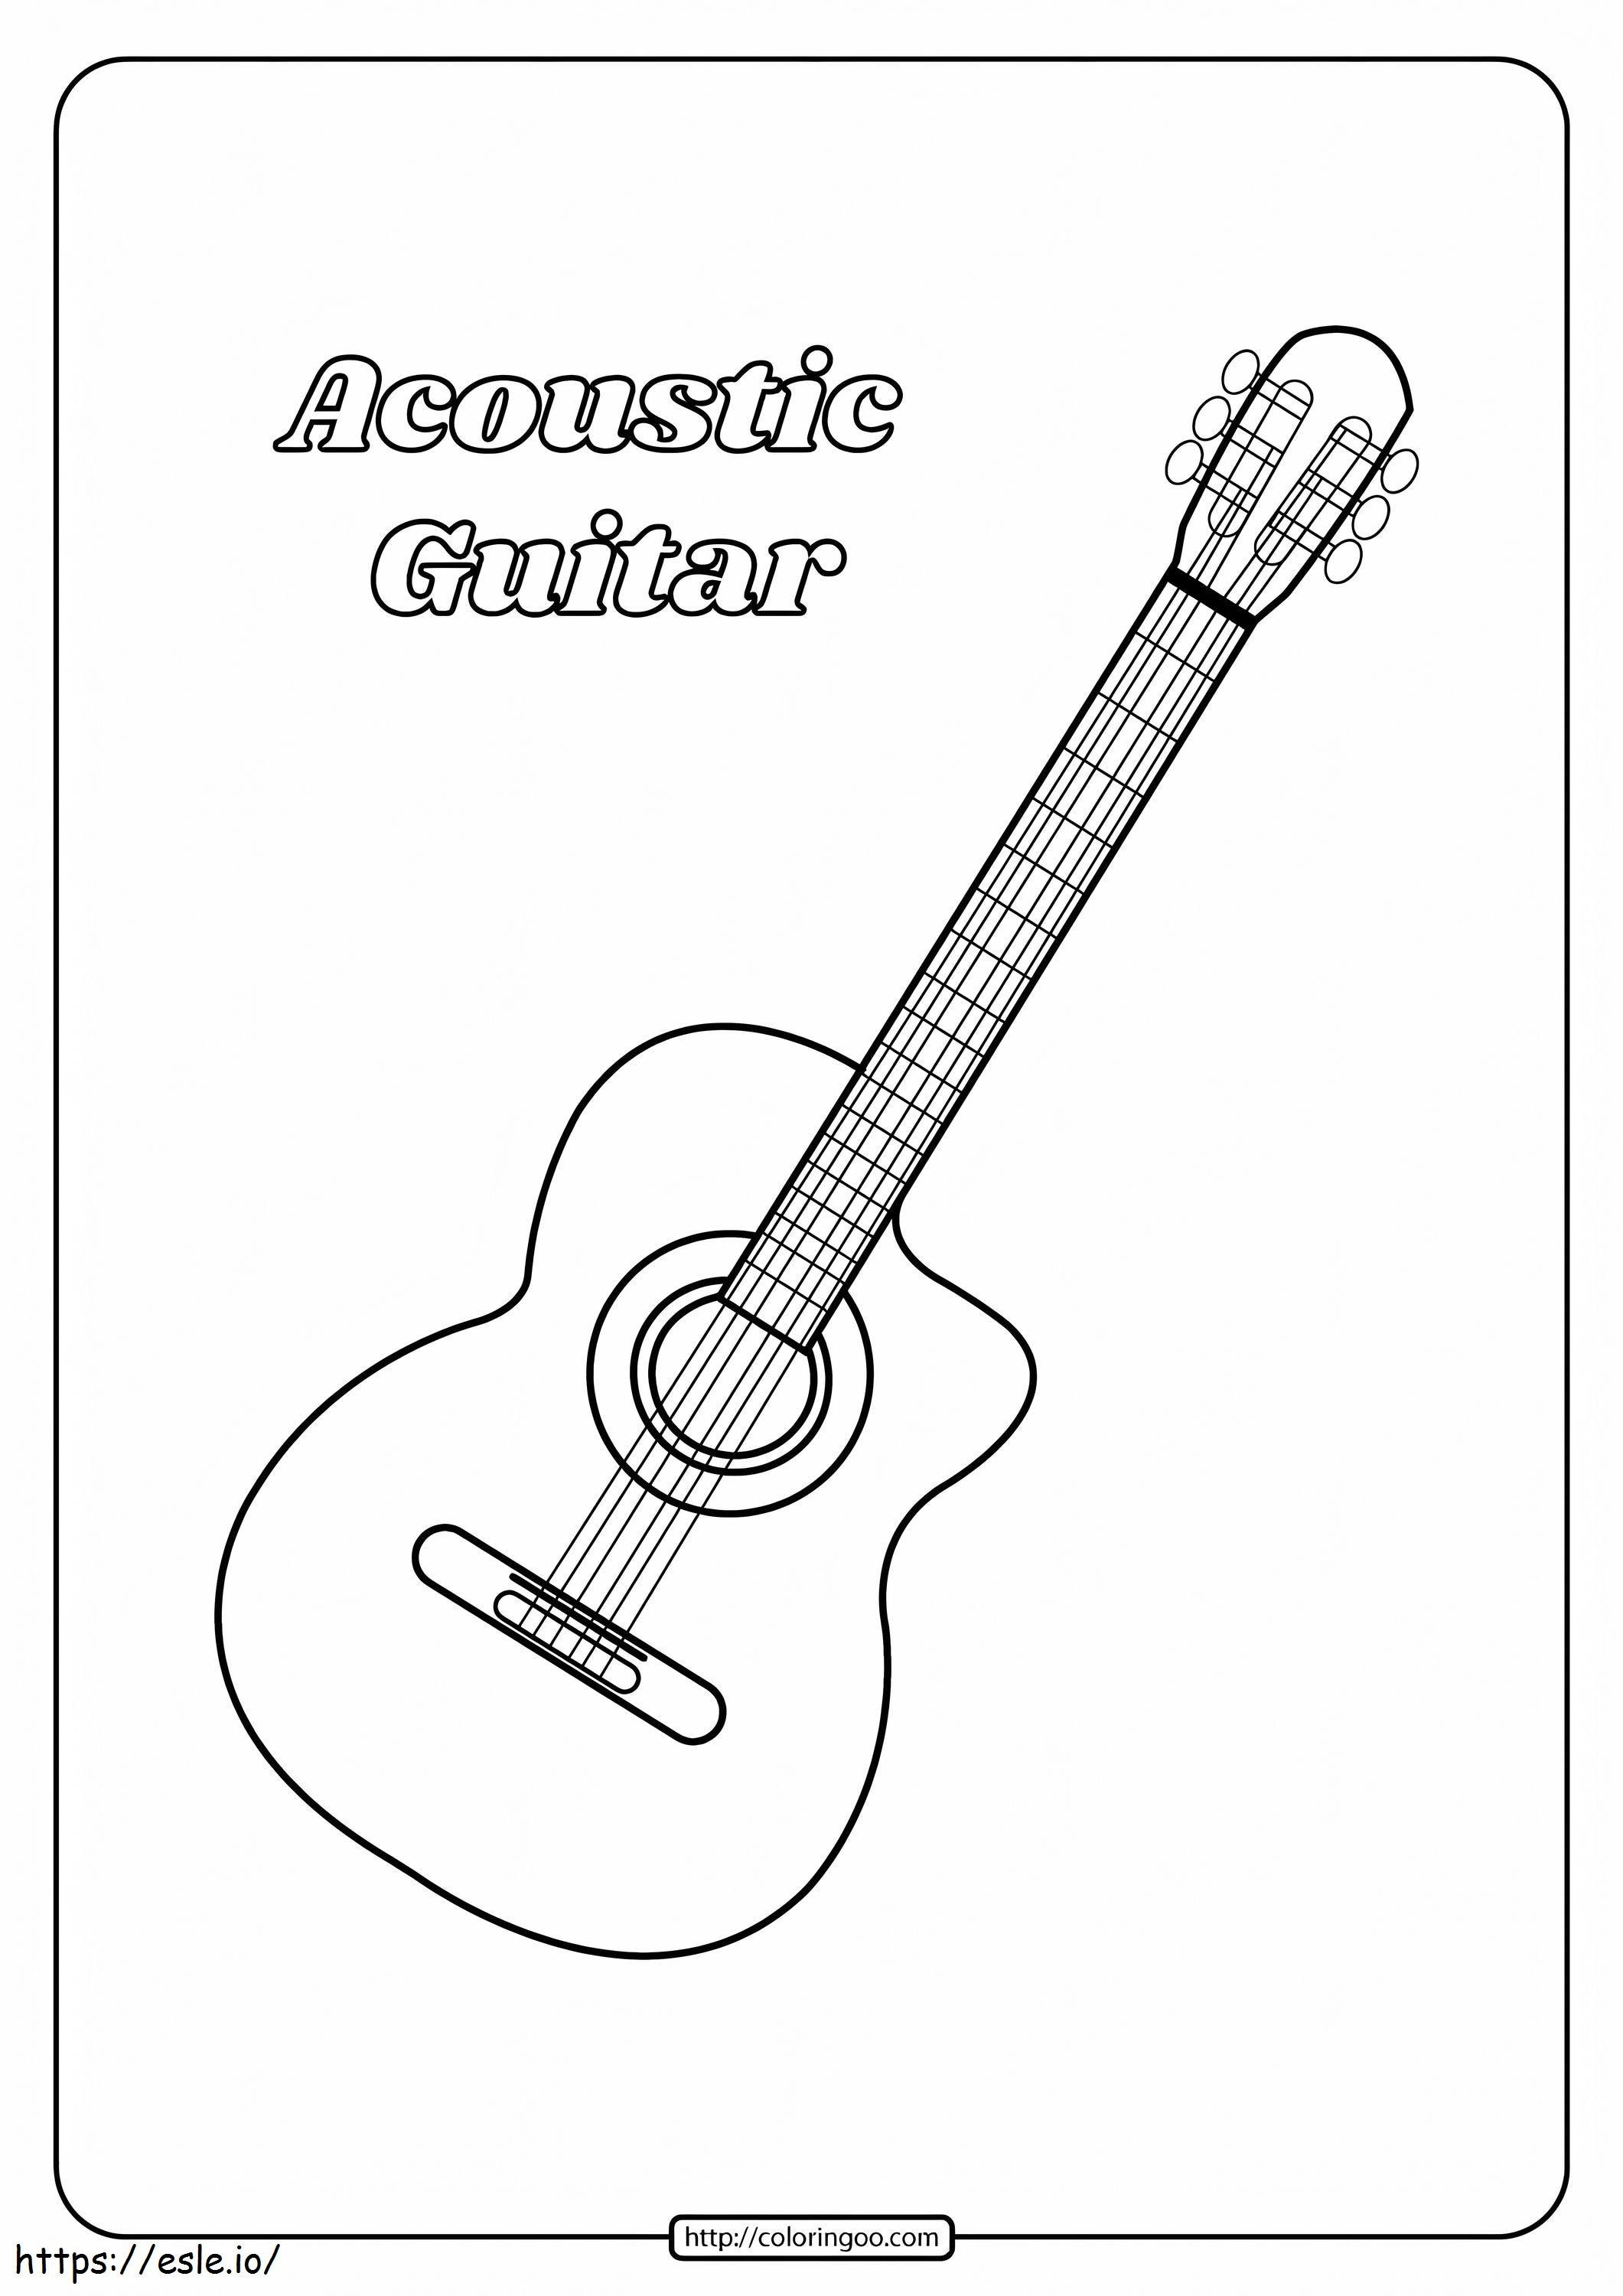 Acoustic Guitar coloring page